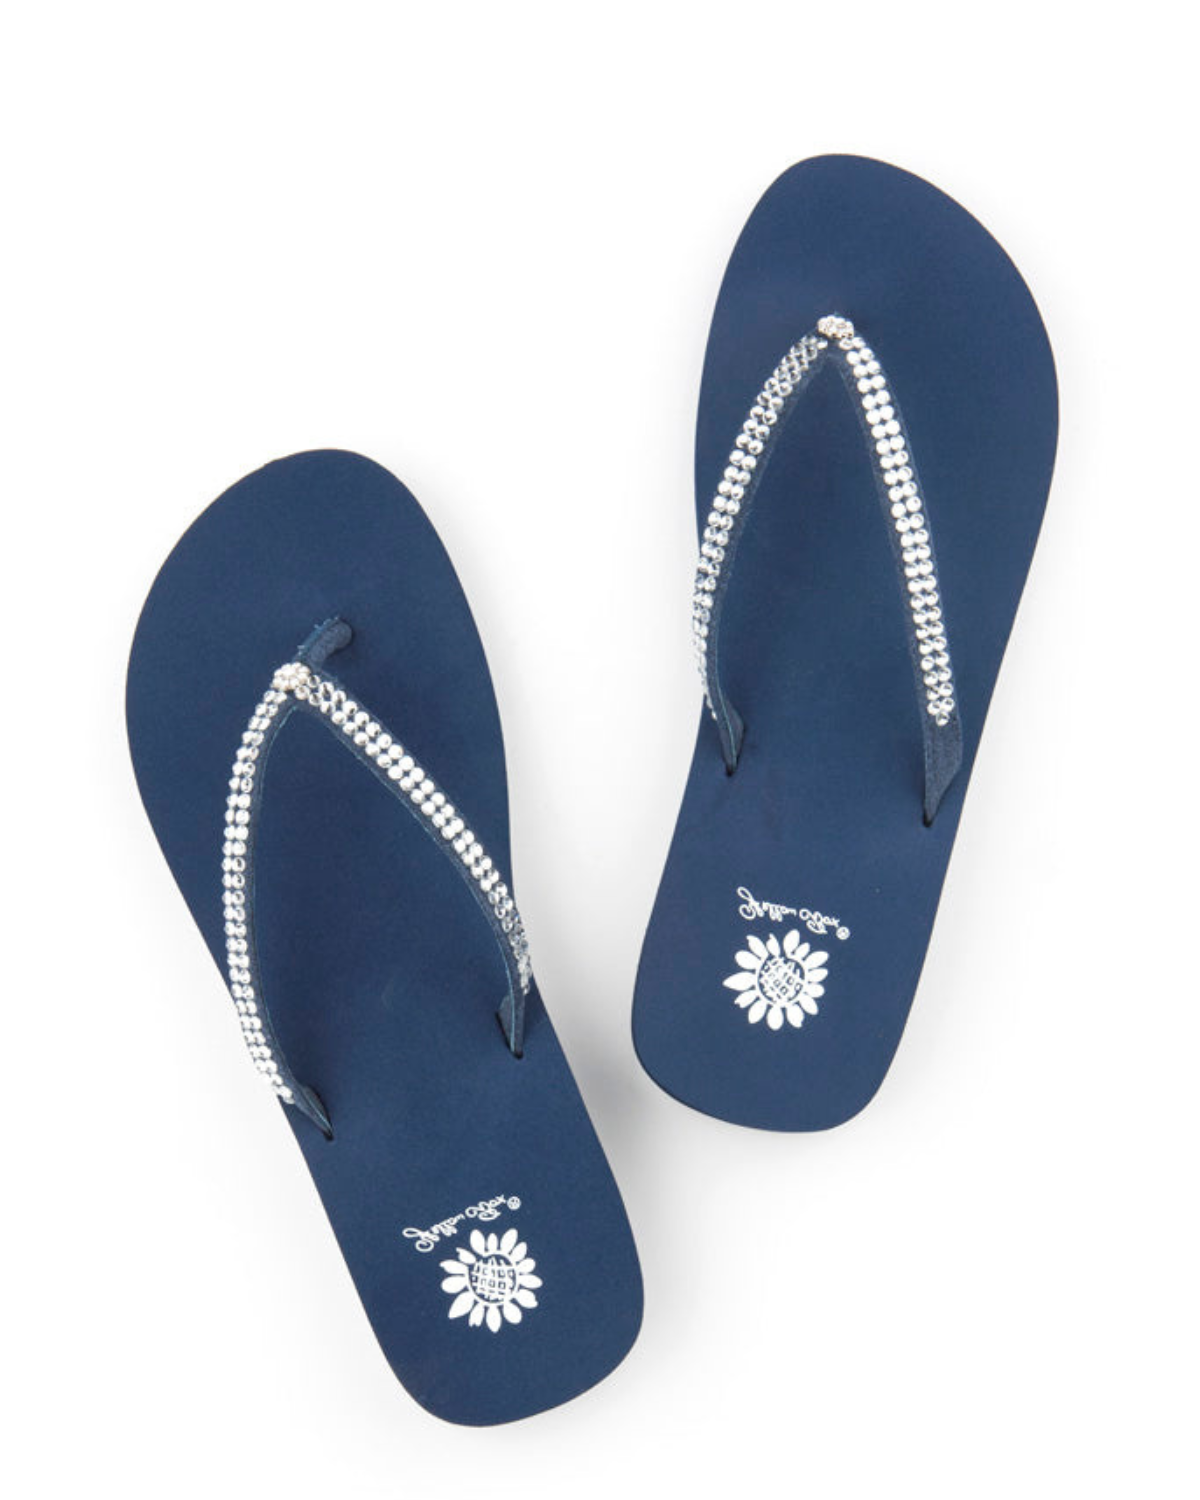 Women's blue wedge sandal with rhinestones on the strap.